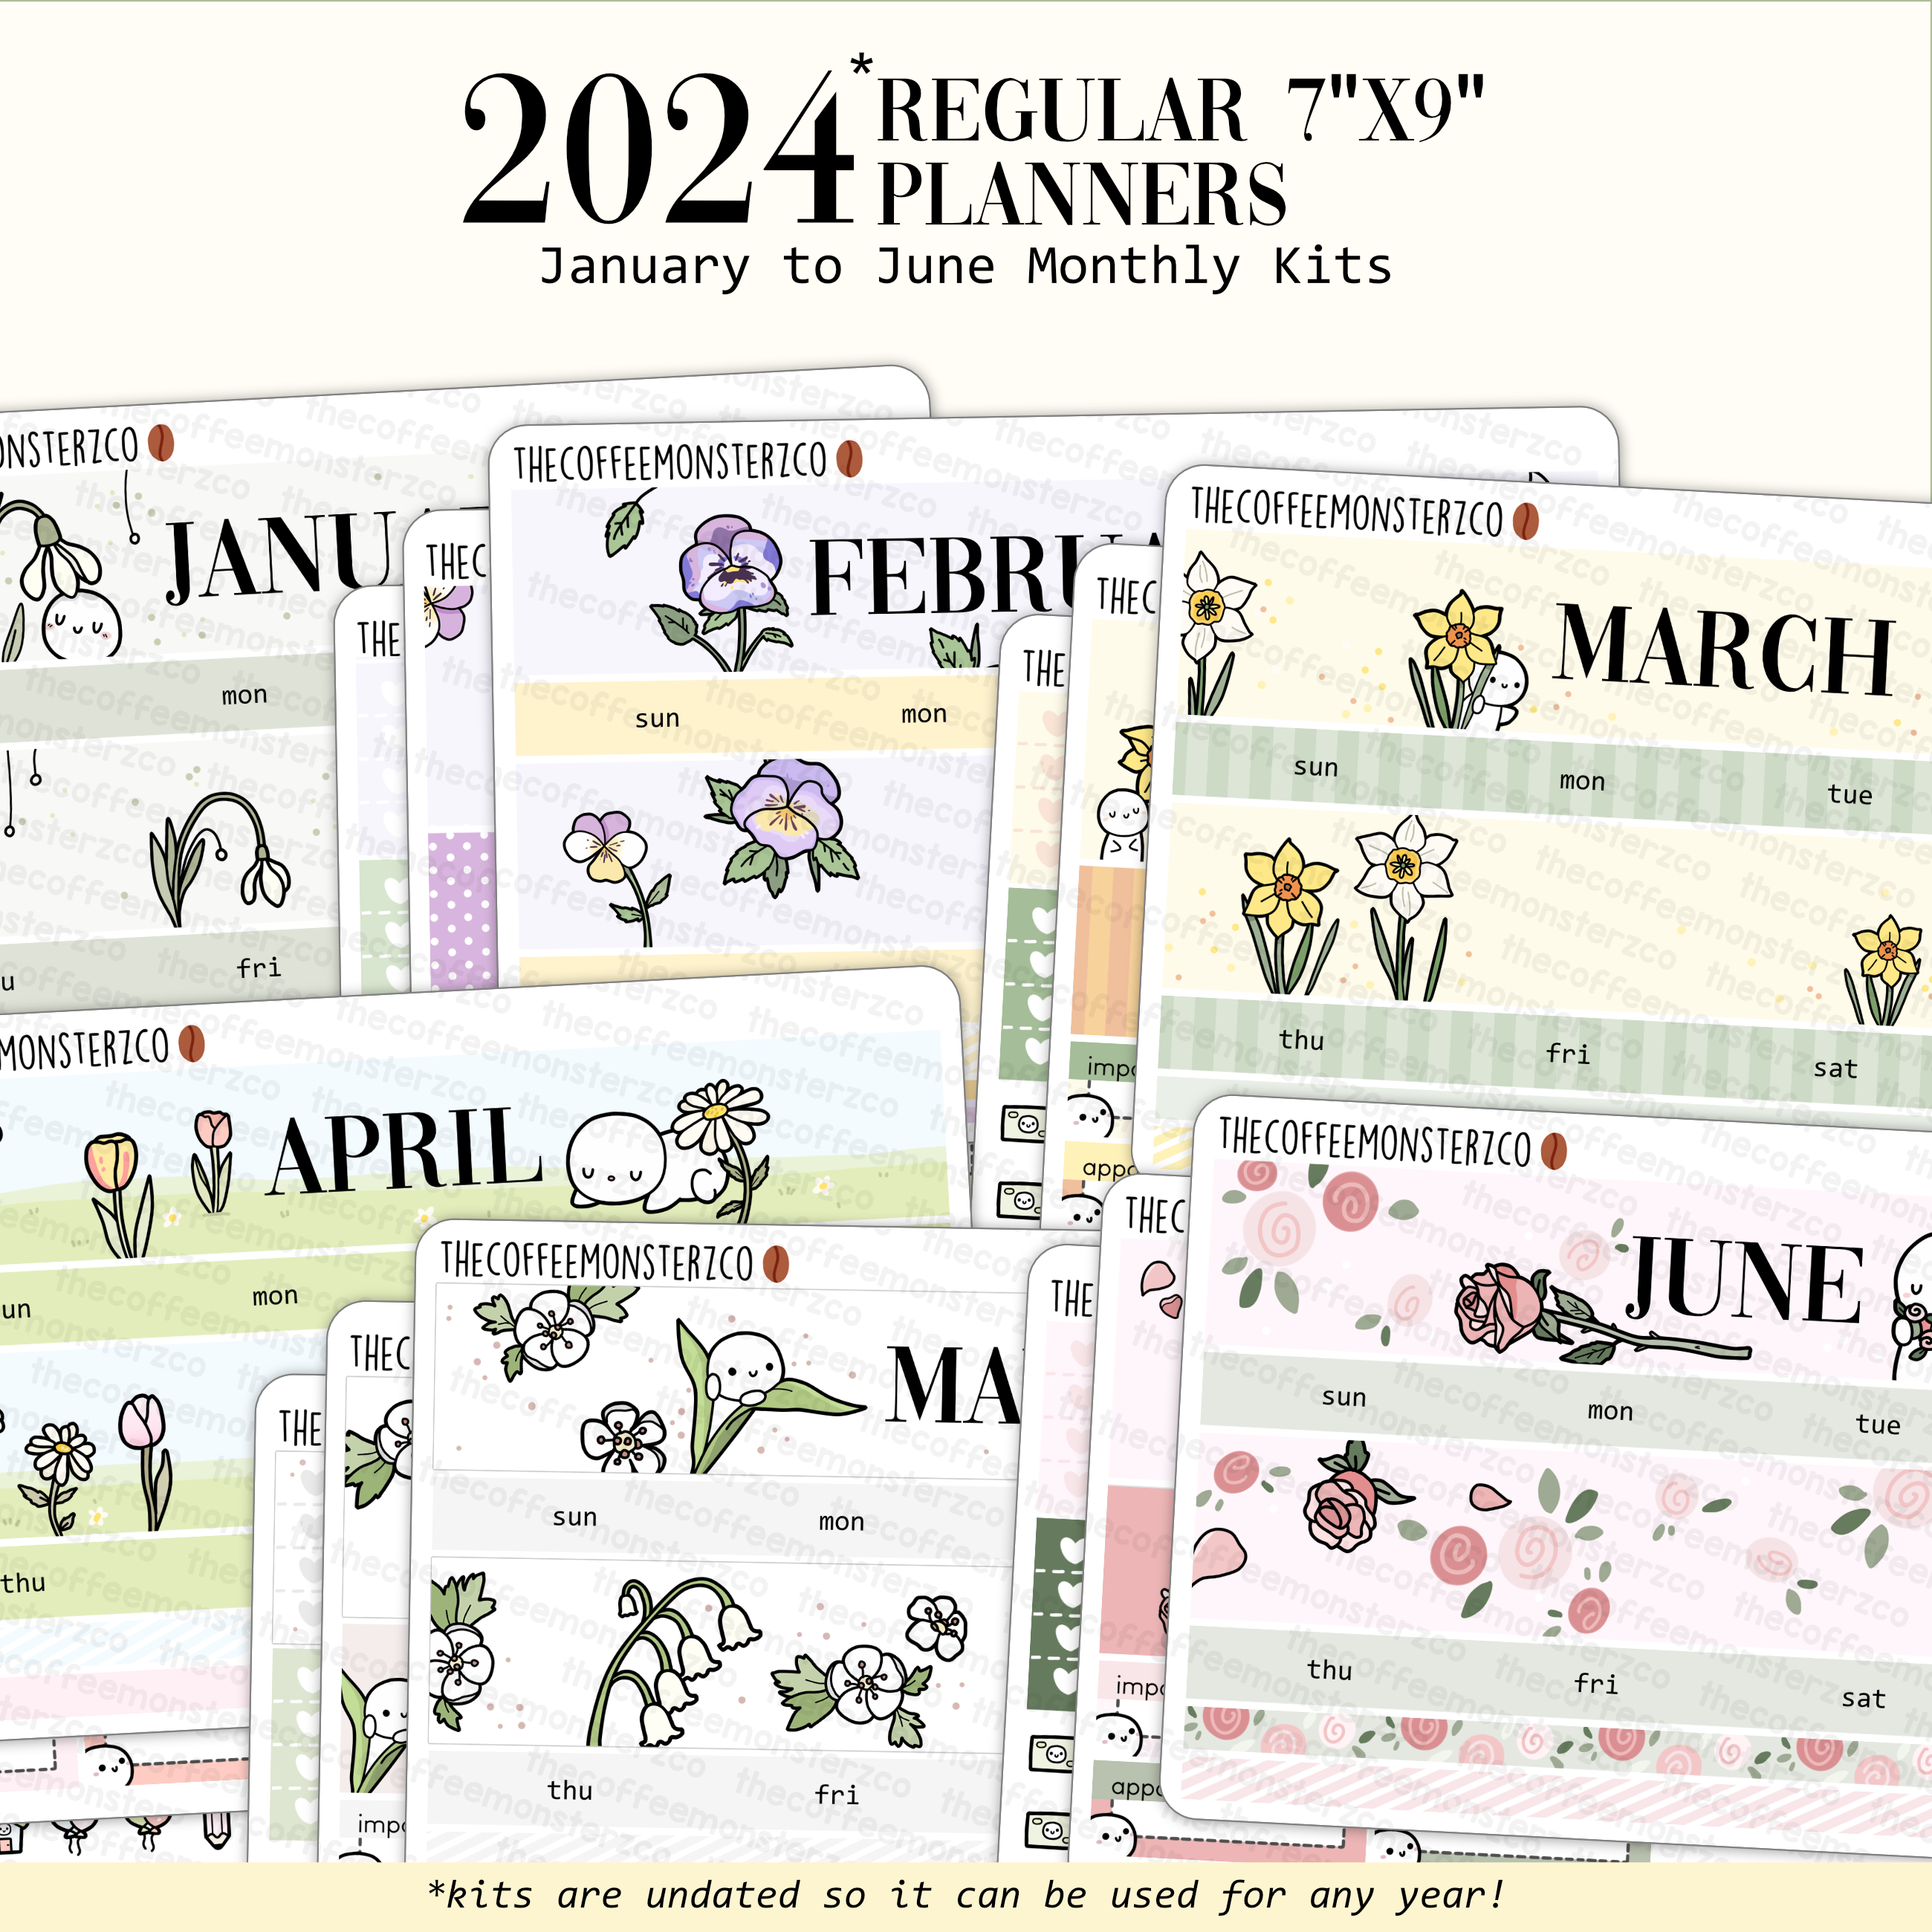 2024 Coordinating Add-ons - Bullet Journal - Part 1 – TheCoffeeMonsterzCo